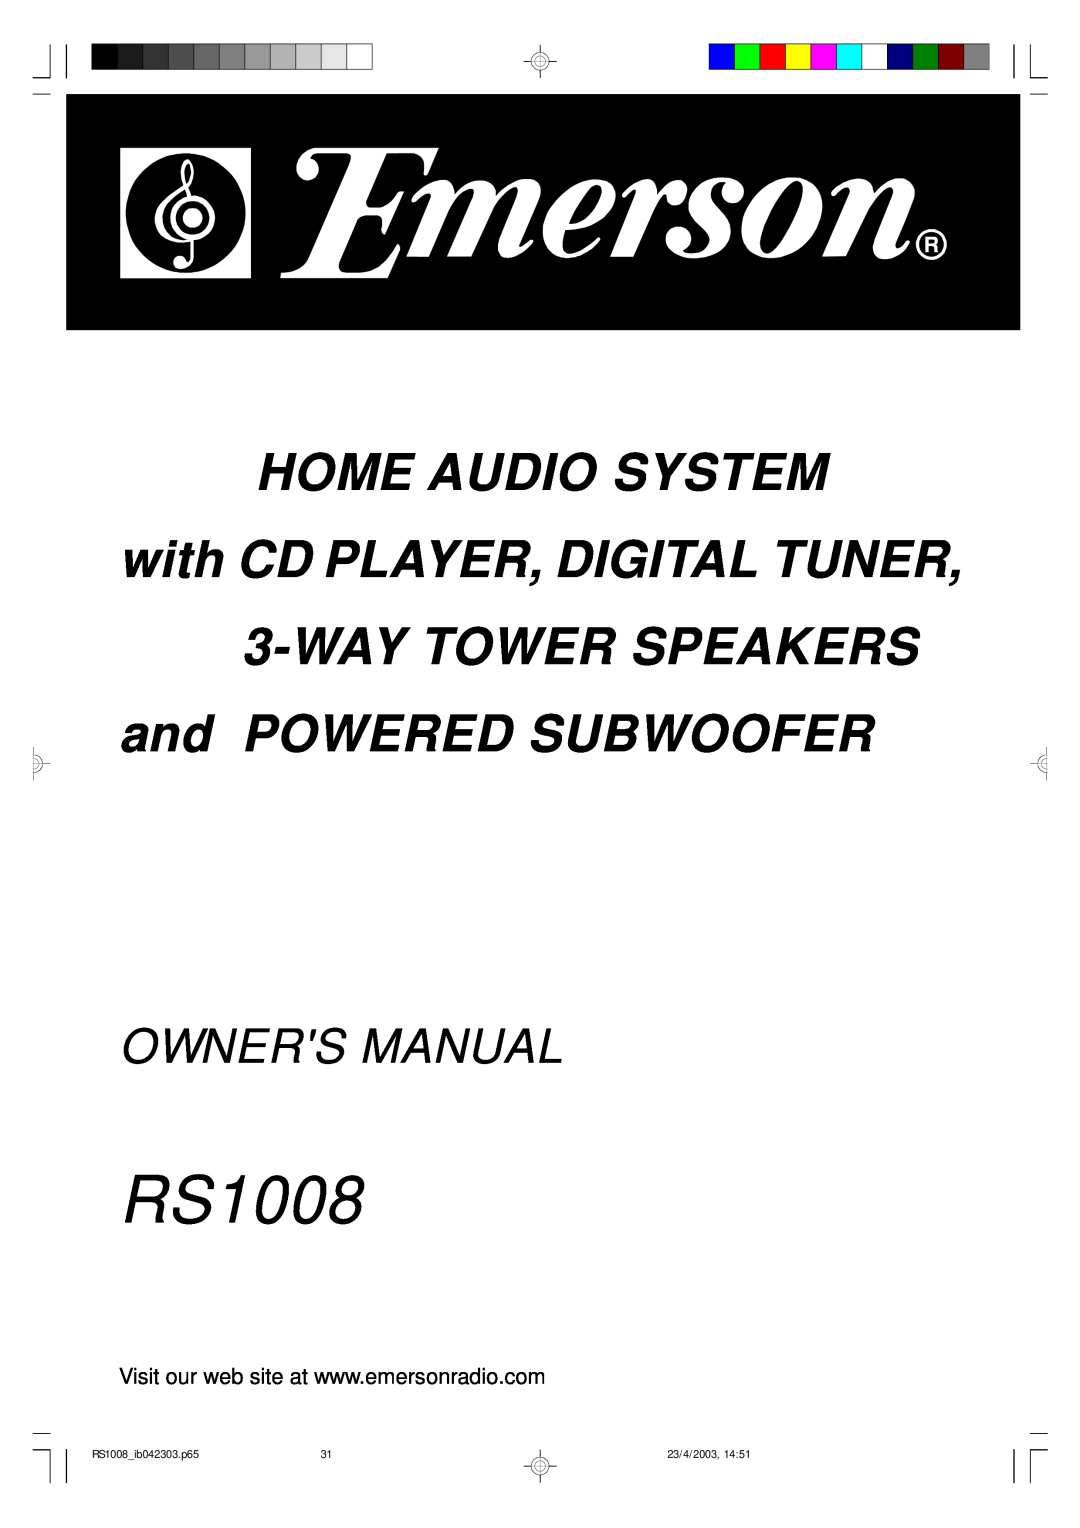 Emerson RS1008 owner manual HOME AUDIO SYSTEM with CD PLAYER, DIGITAL TUNER, WAYTOWER SPEAKERS and POWERED SUBWOOFER 